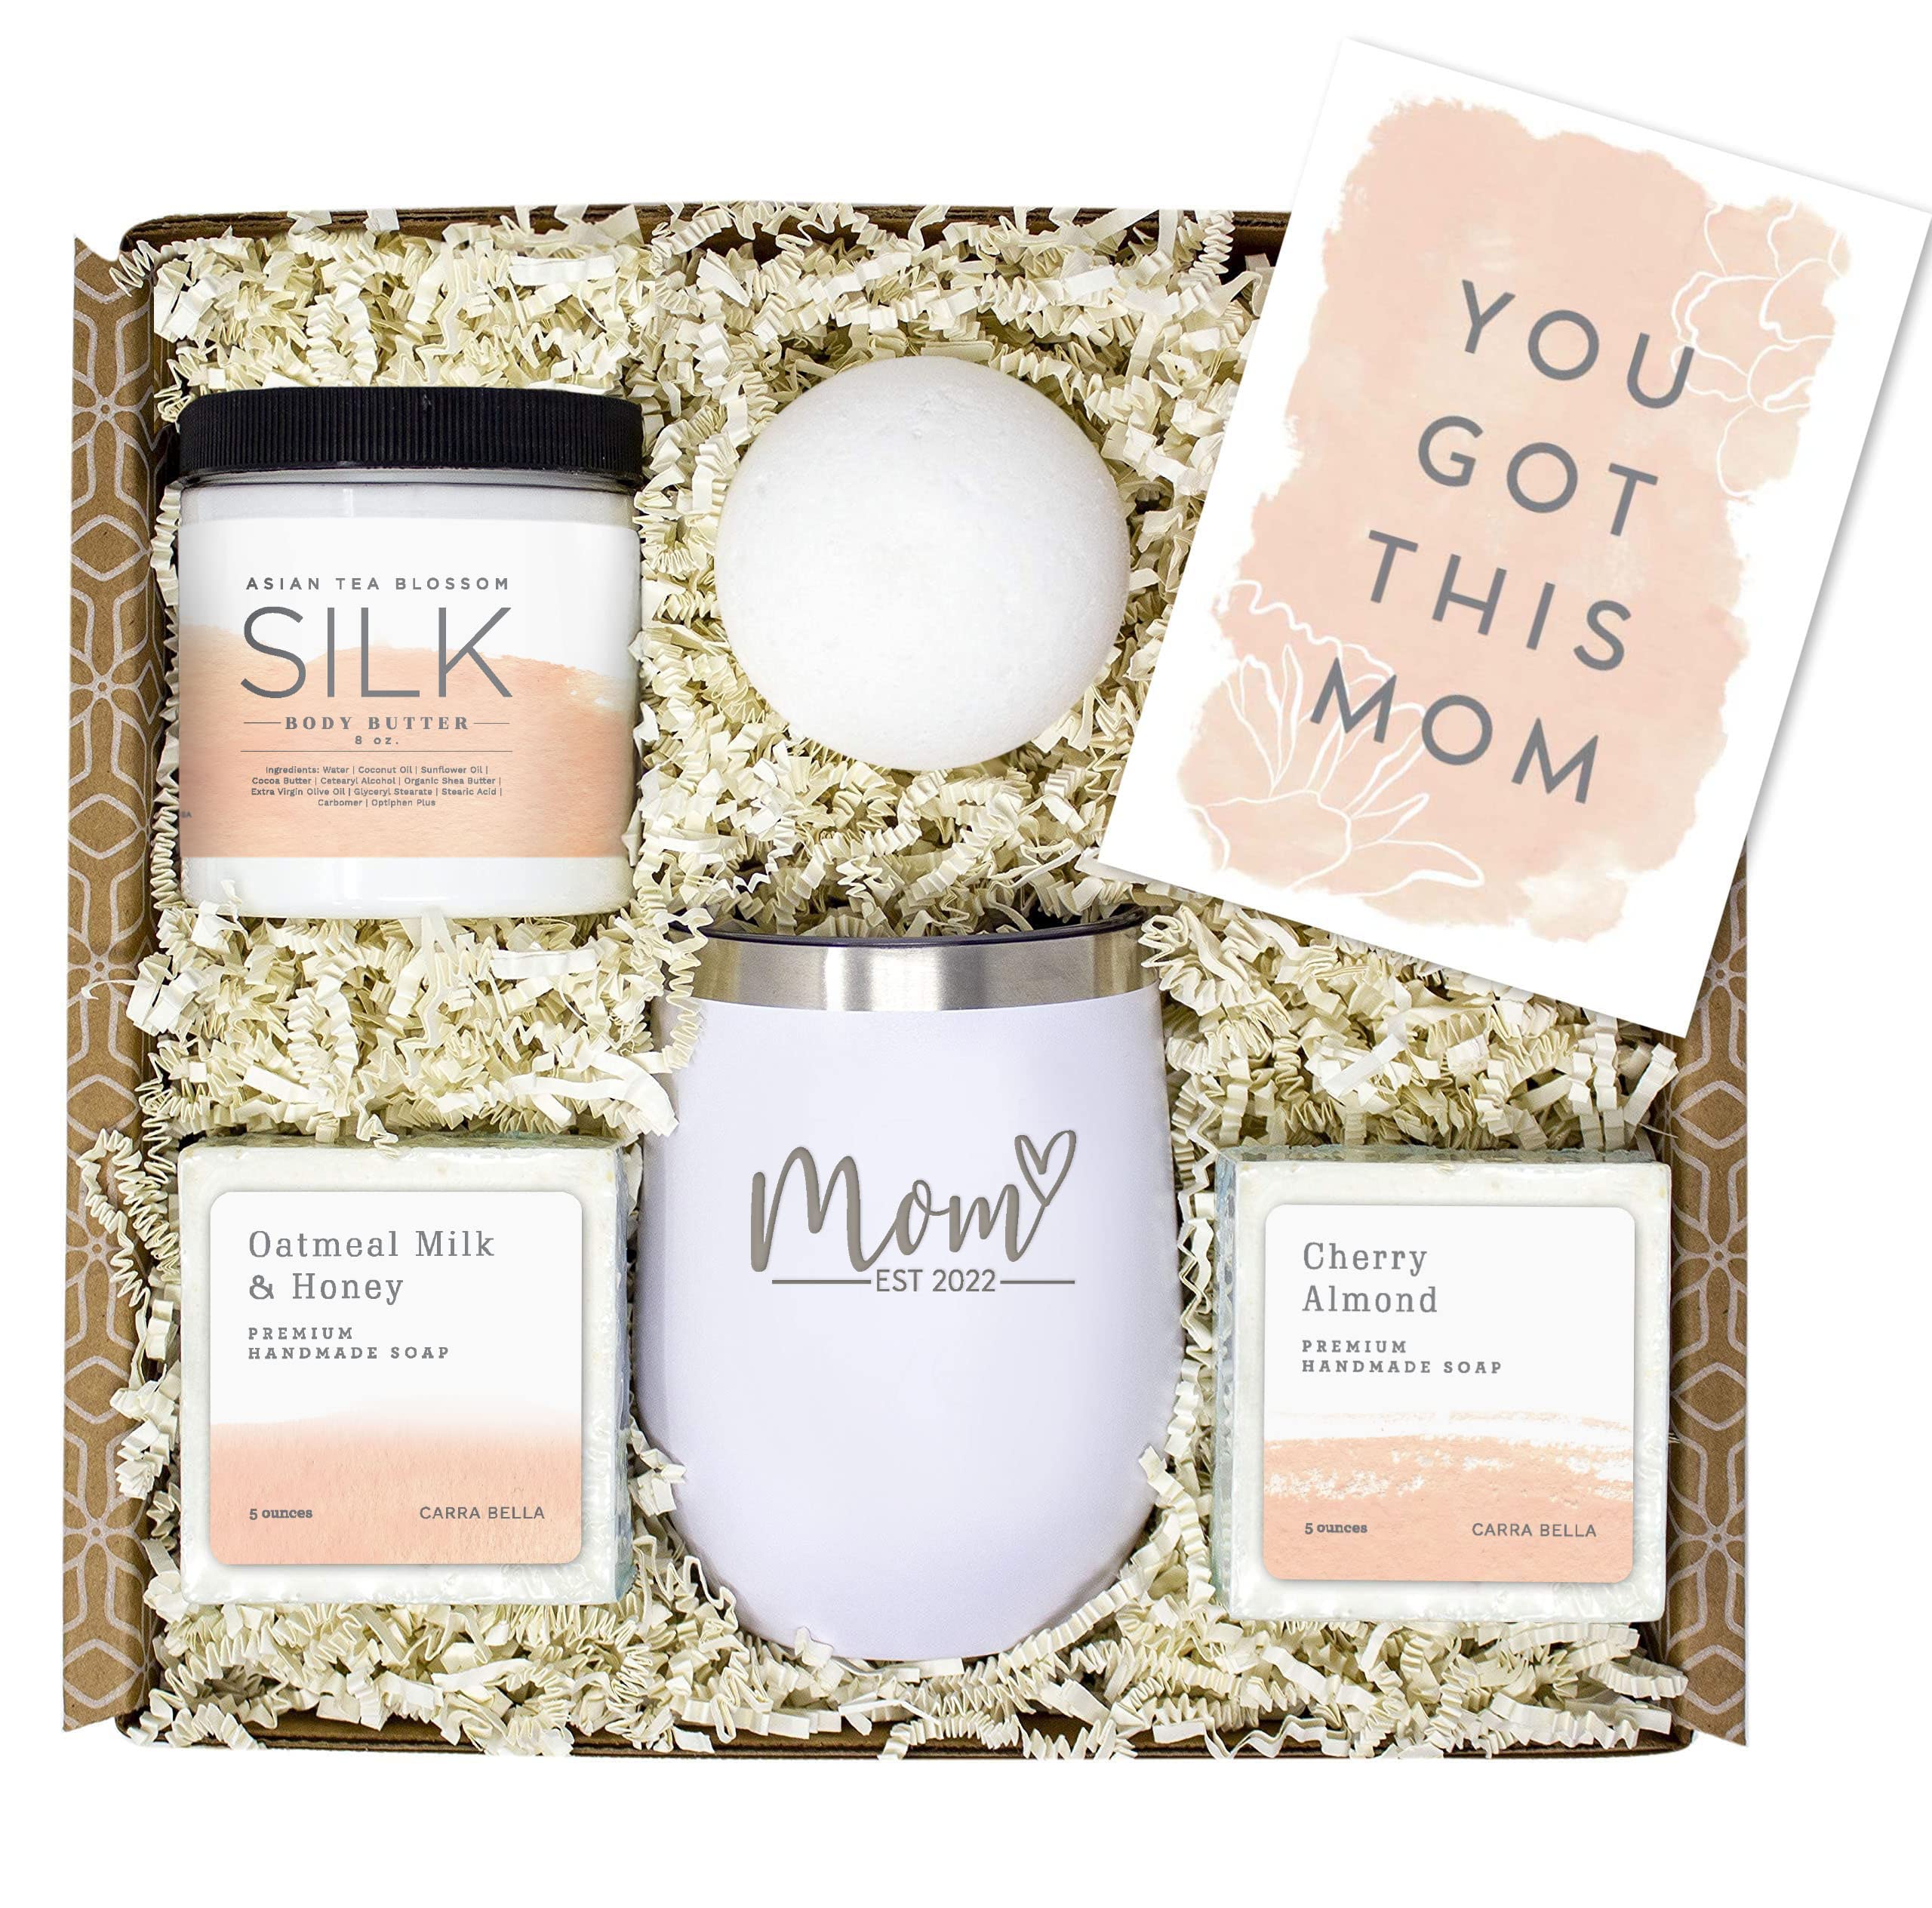 41 Must Have Pregnancy Gifts for First Time Moms - Organized Chaos Blog